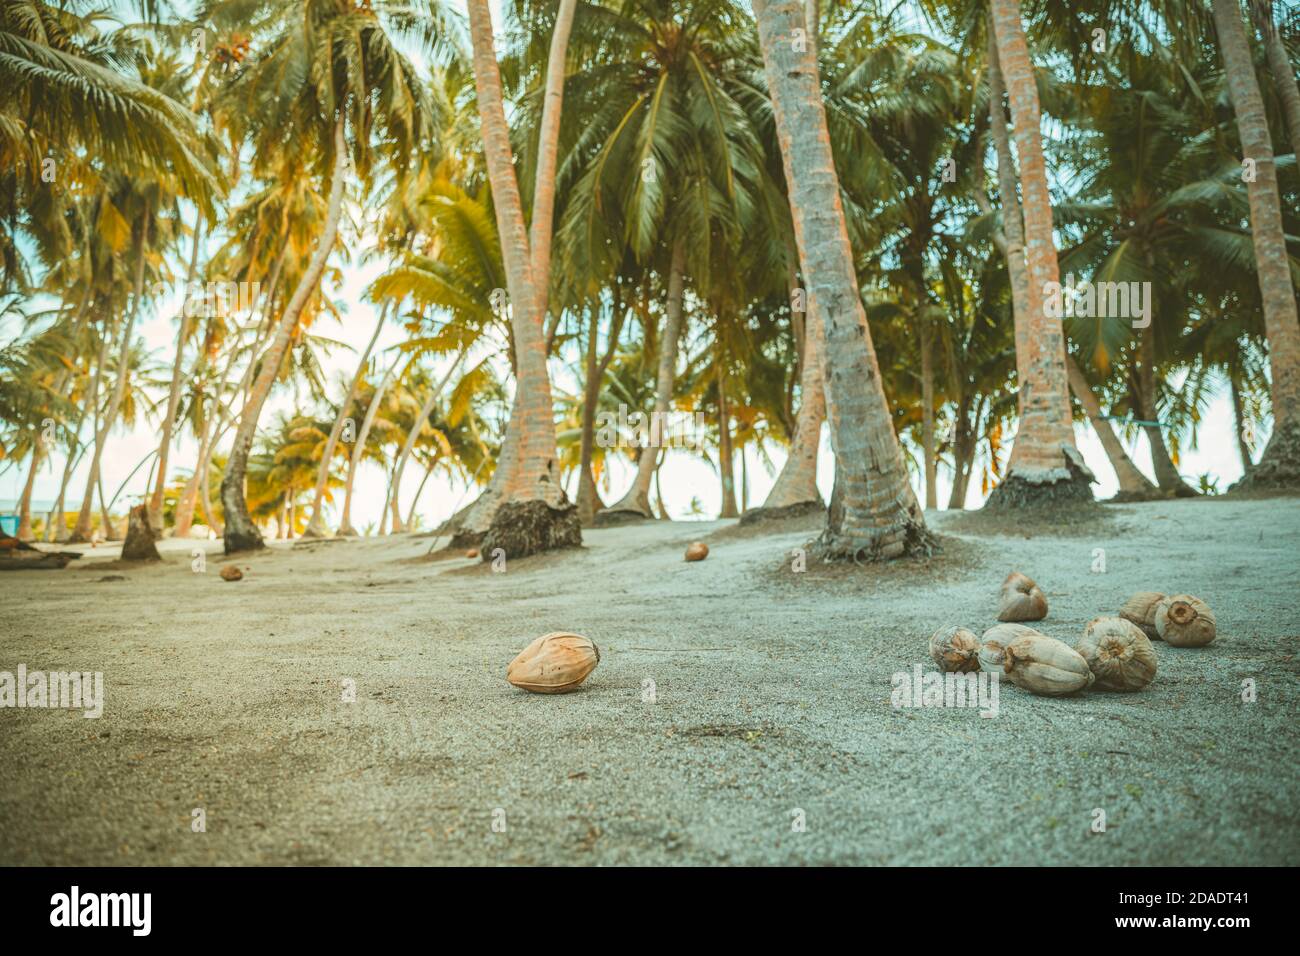 Palm trees, tropical island with coco palms. Exotic nature pattern ...